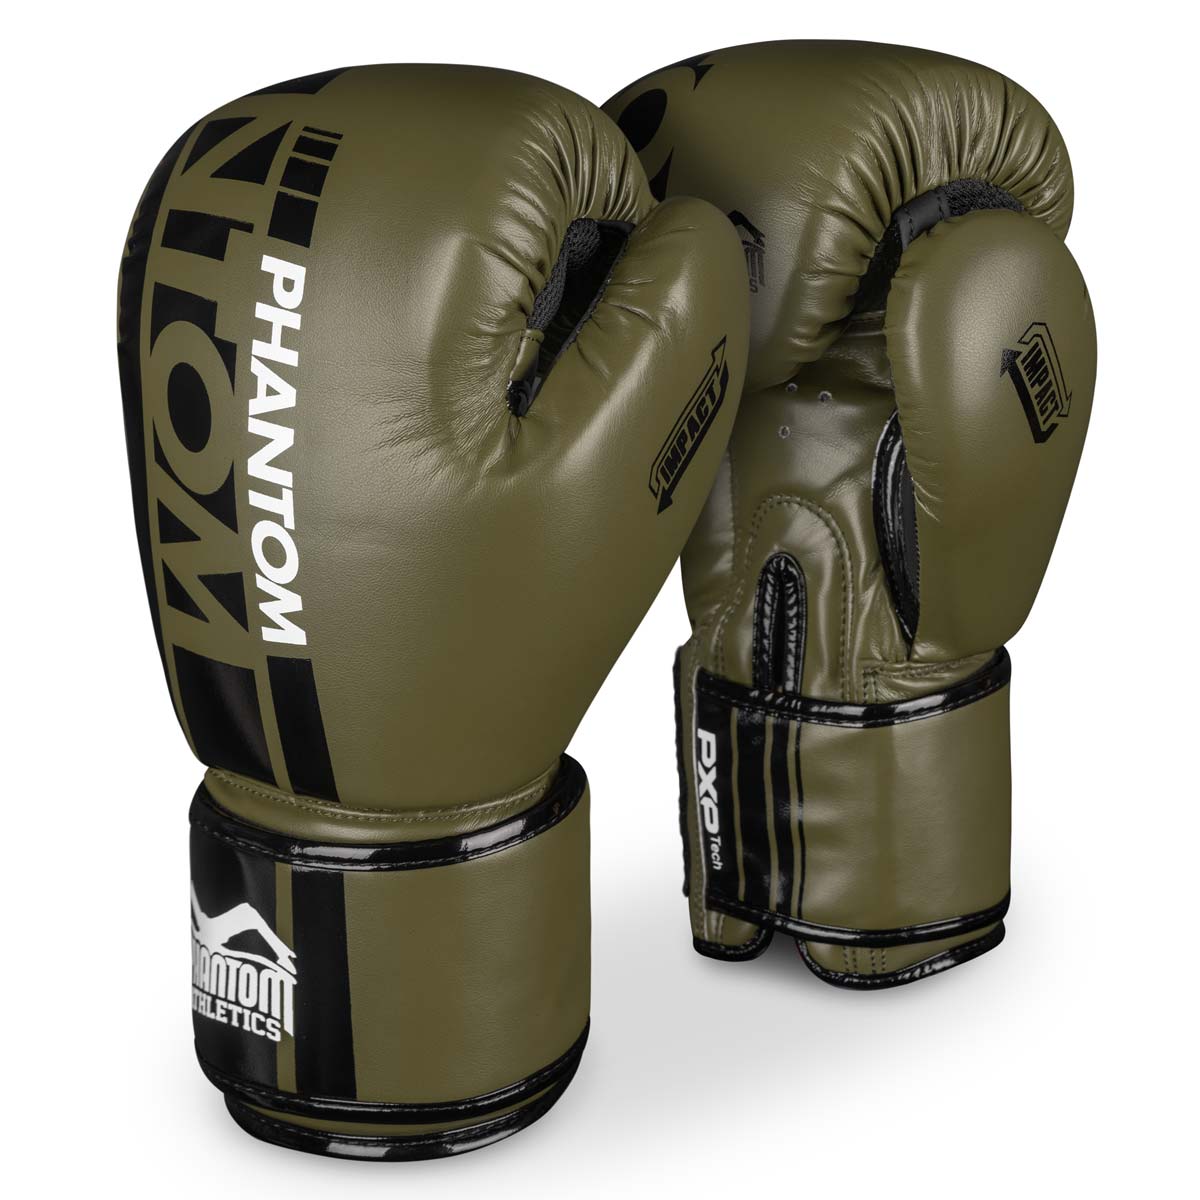 Phantom boxing gloves APEX Army Green for martial arts training